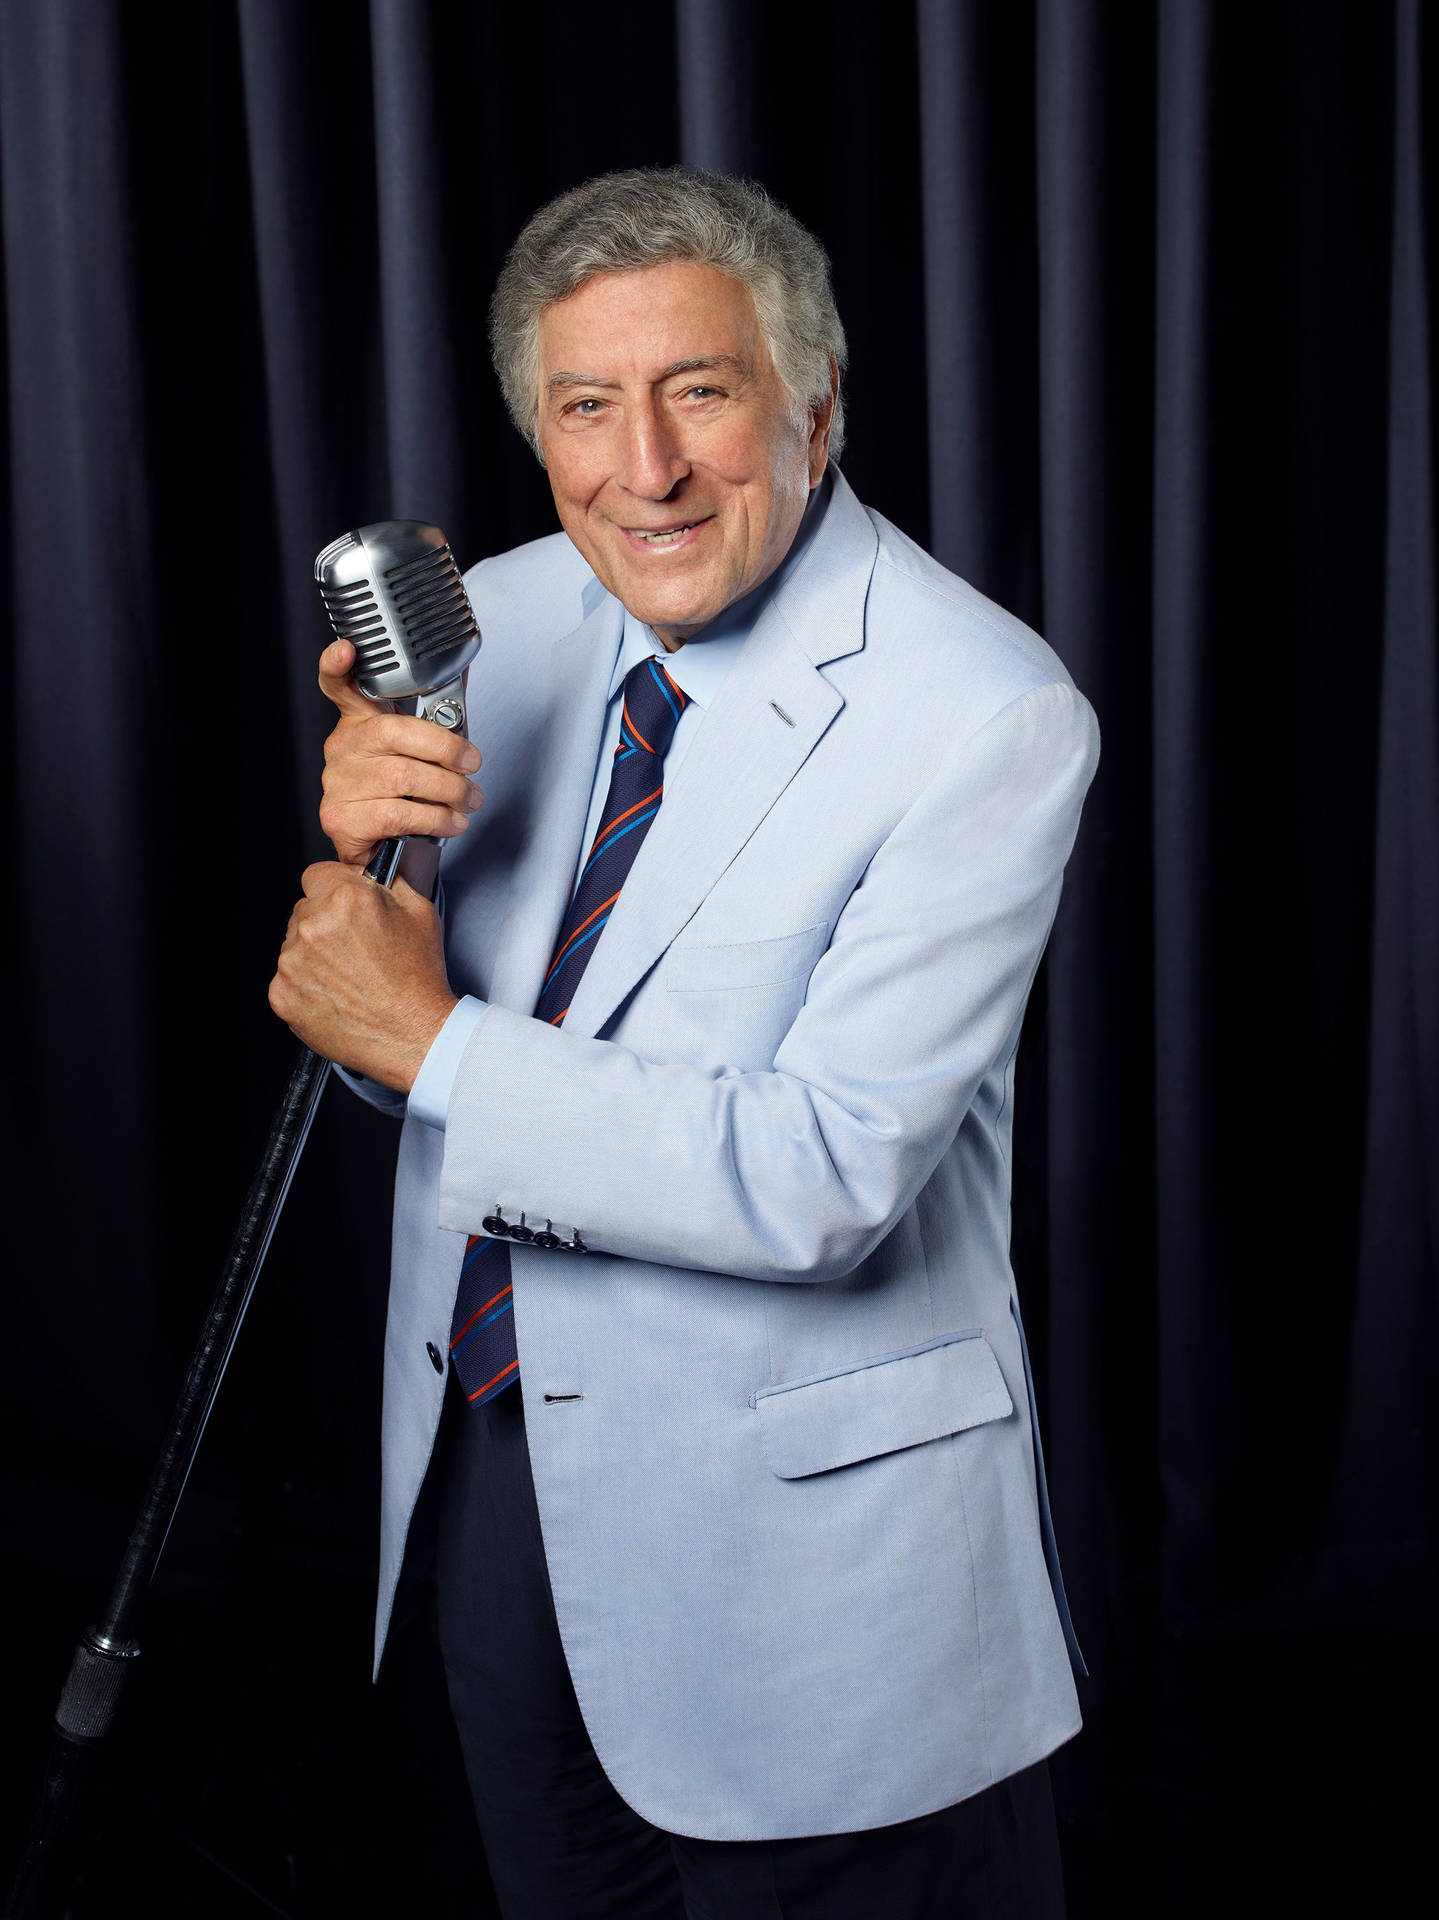 Berömdamerikansk Skådespelare Tony Bennett. (note: This Is A Direct Translation Of The Given Sentence. However, It May Not Be The Most Appropriate Wording For A Computer Or Mobile Wallpaper Context. A More Fitting Translation Would Depend On The Specific Context And Purpose Of The Wallpaper.) Wallpaper